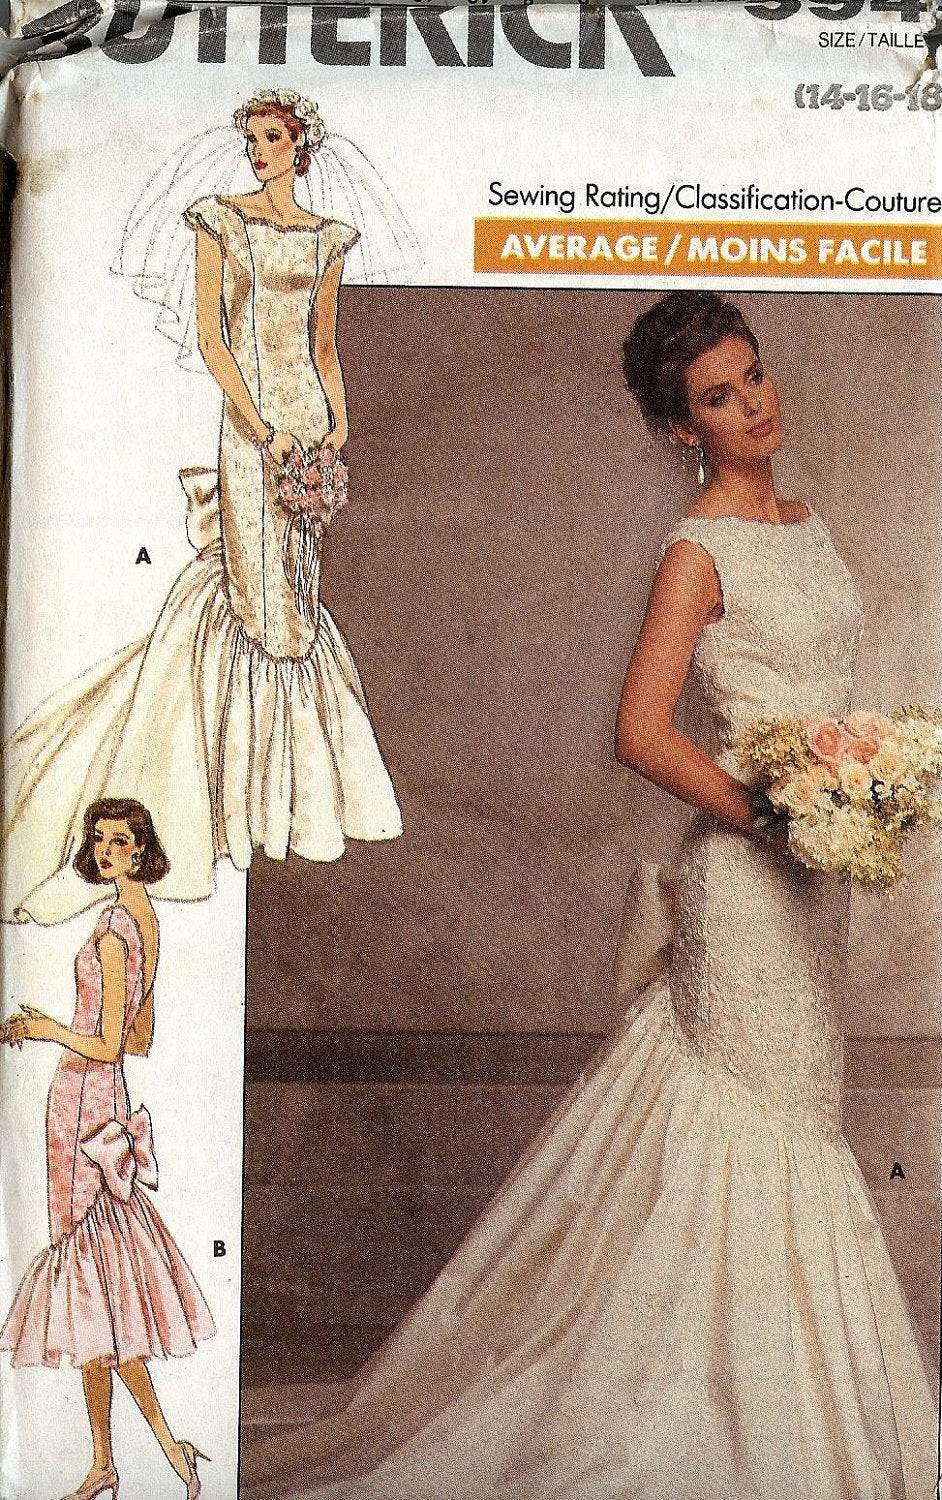 Wedding Gown Patterns
 PATTERN Butterick 5941 Wedding Dress fitted by whitestarheart